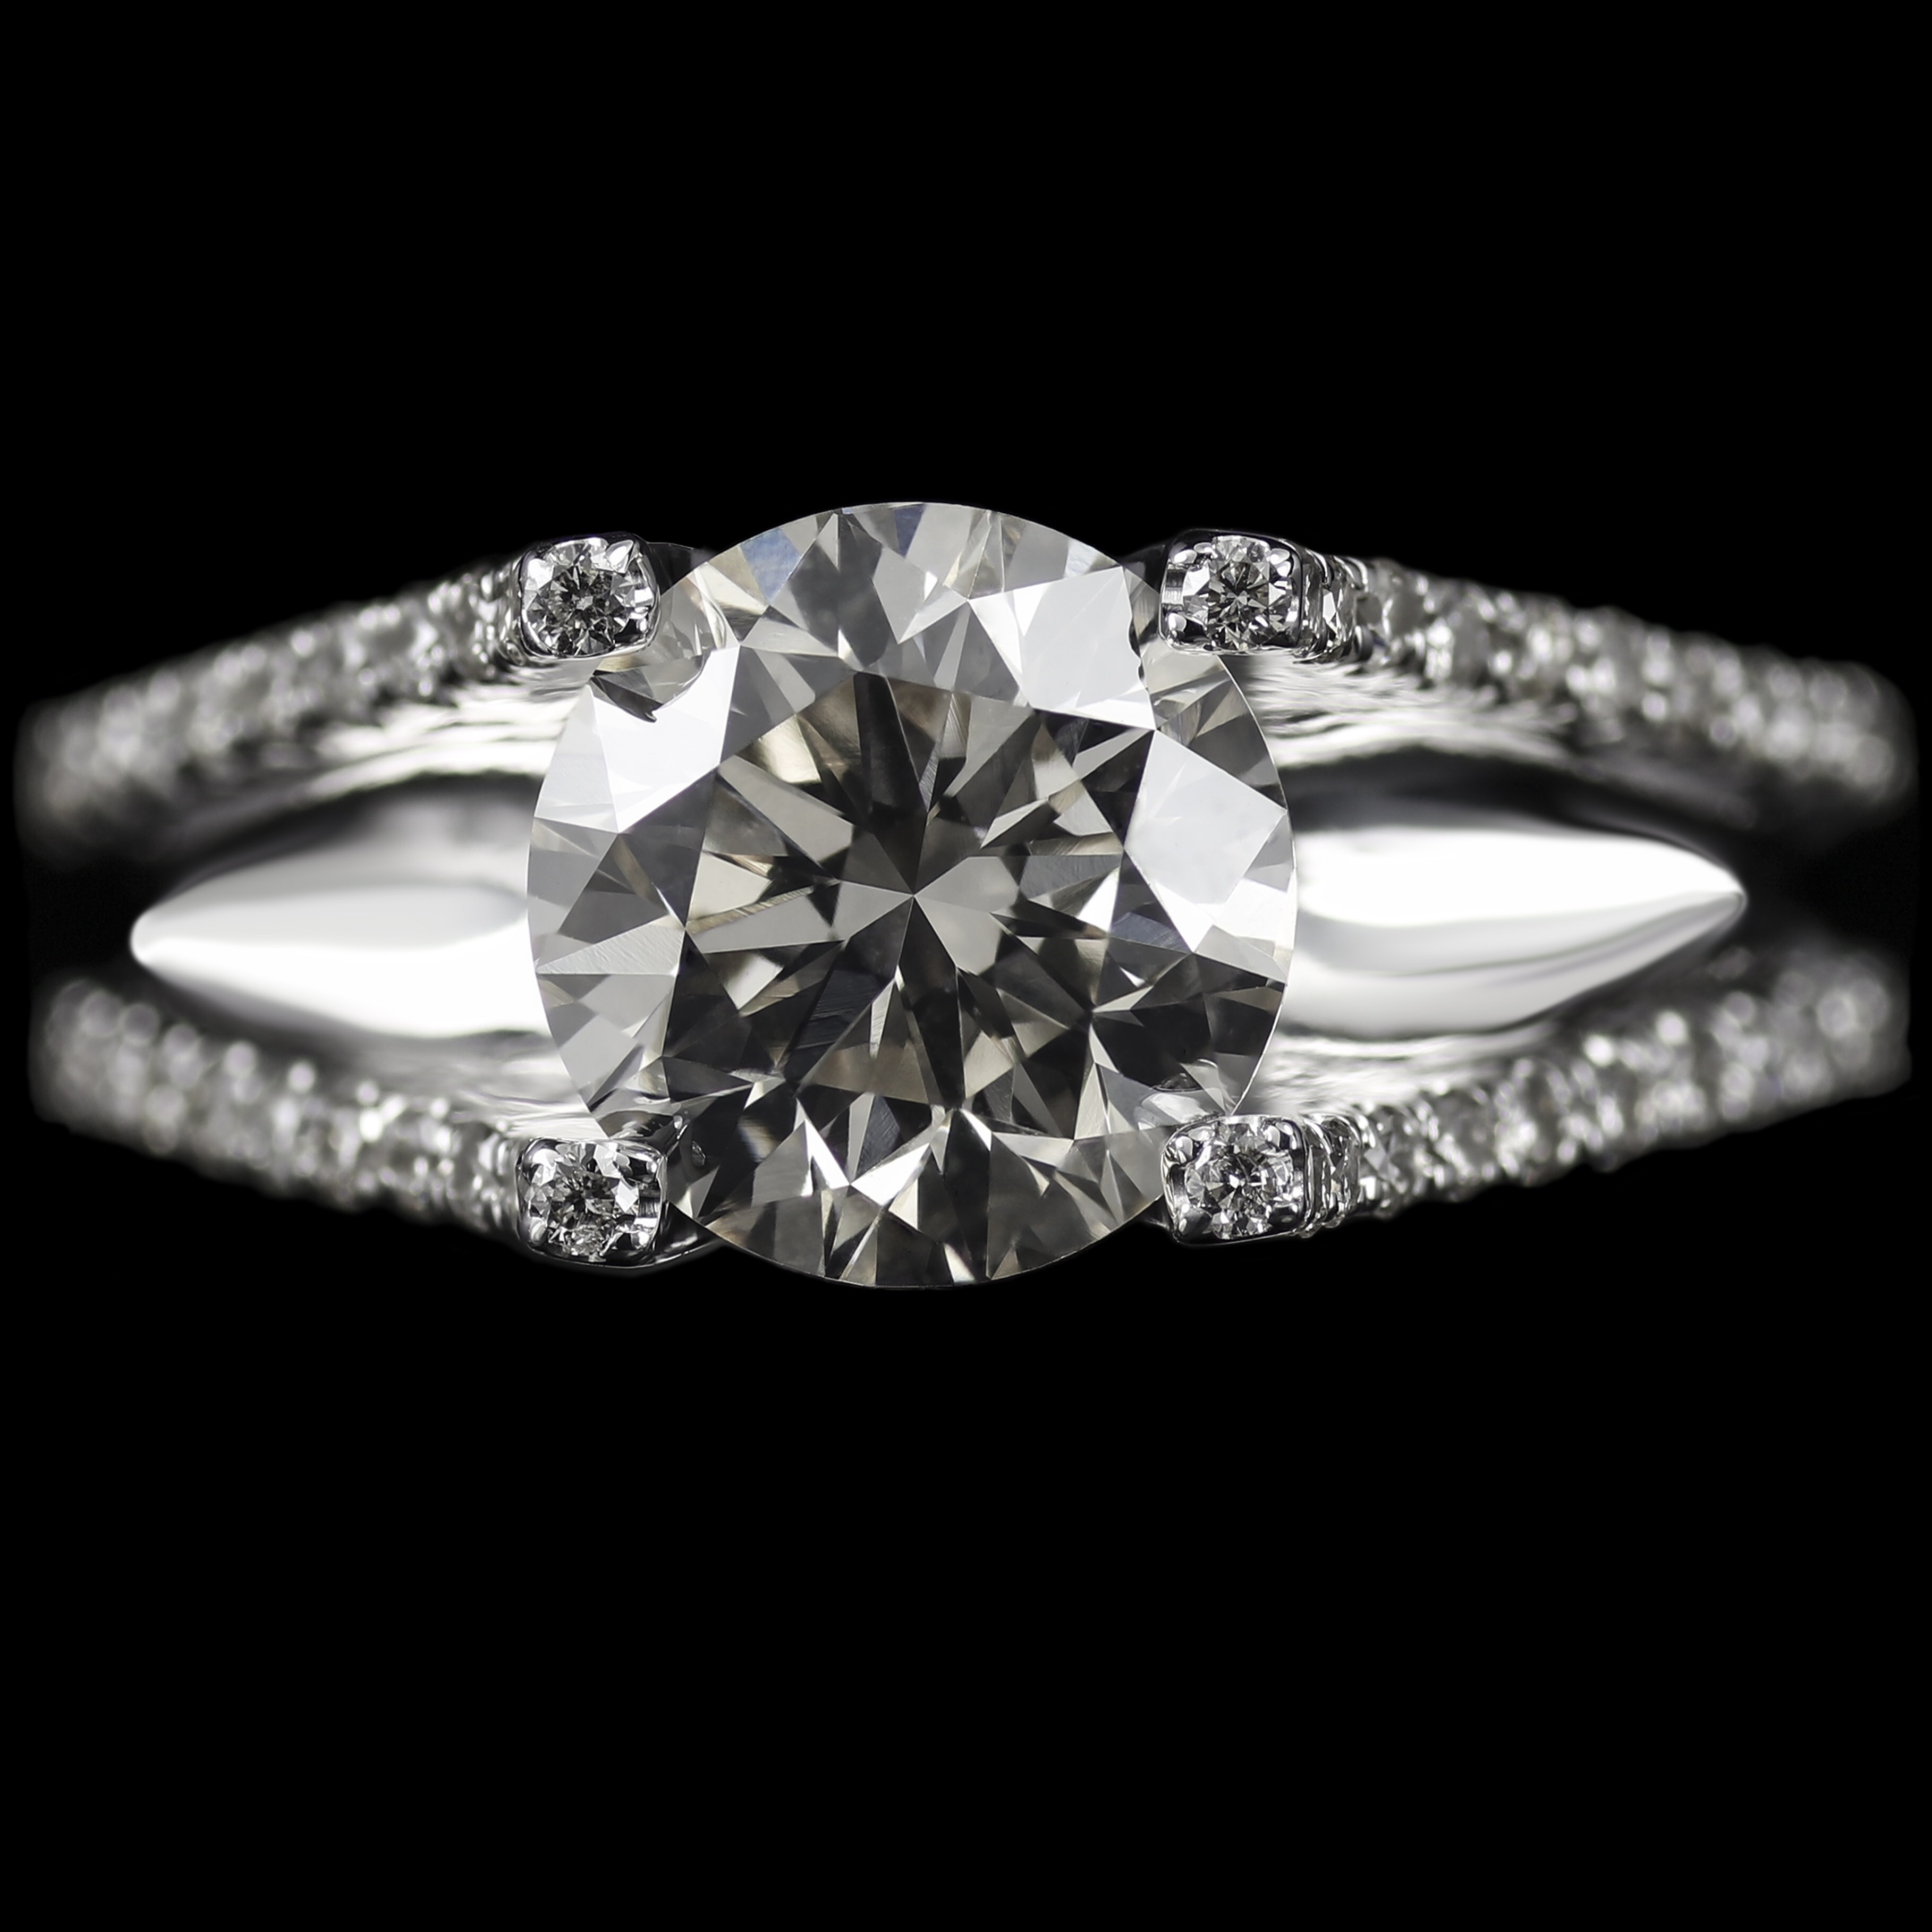 Ring of 2.5ct